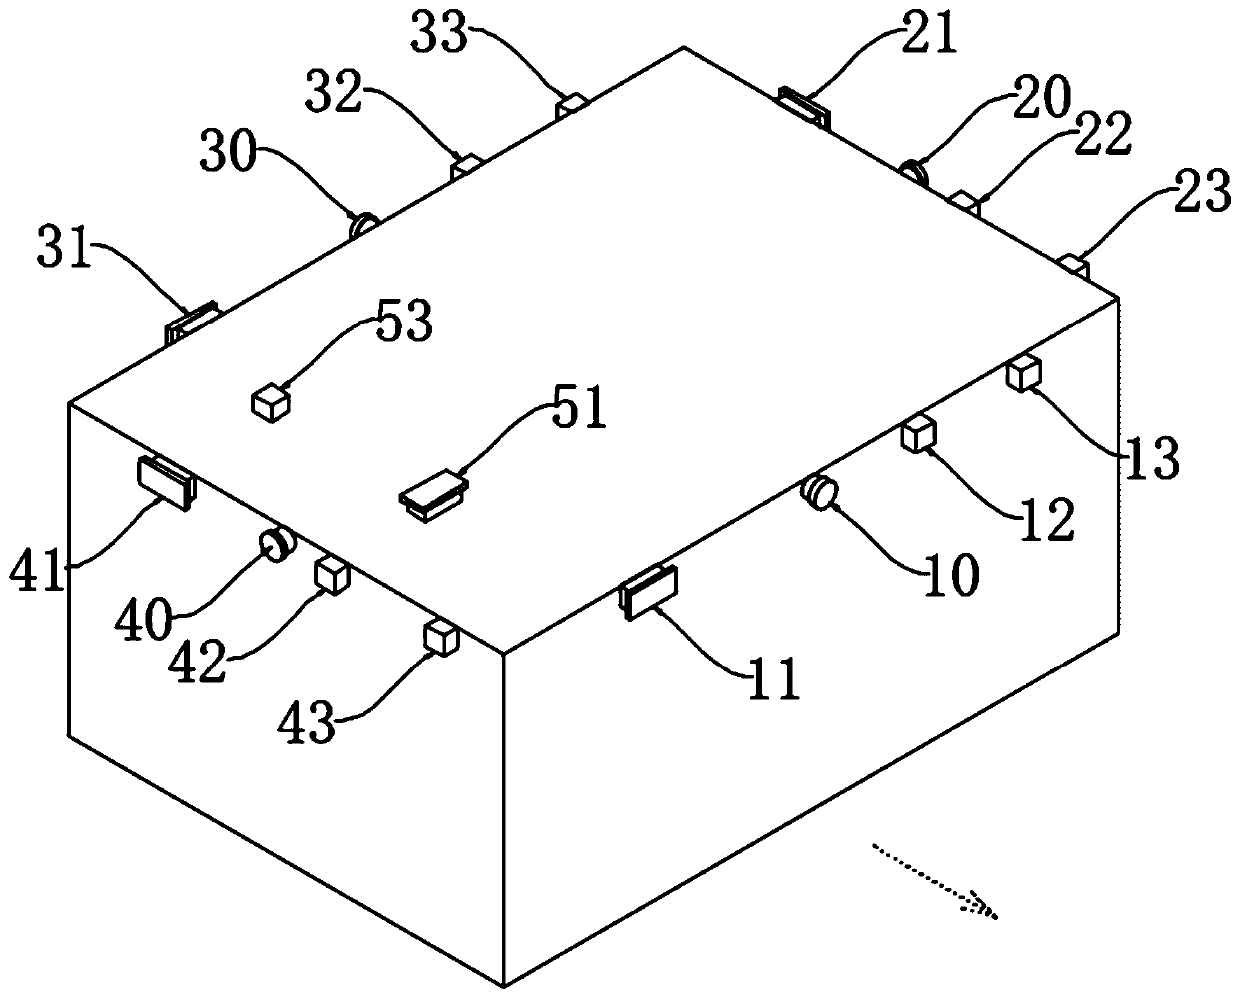 Self-adaptive stealth system and method for square cabin